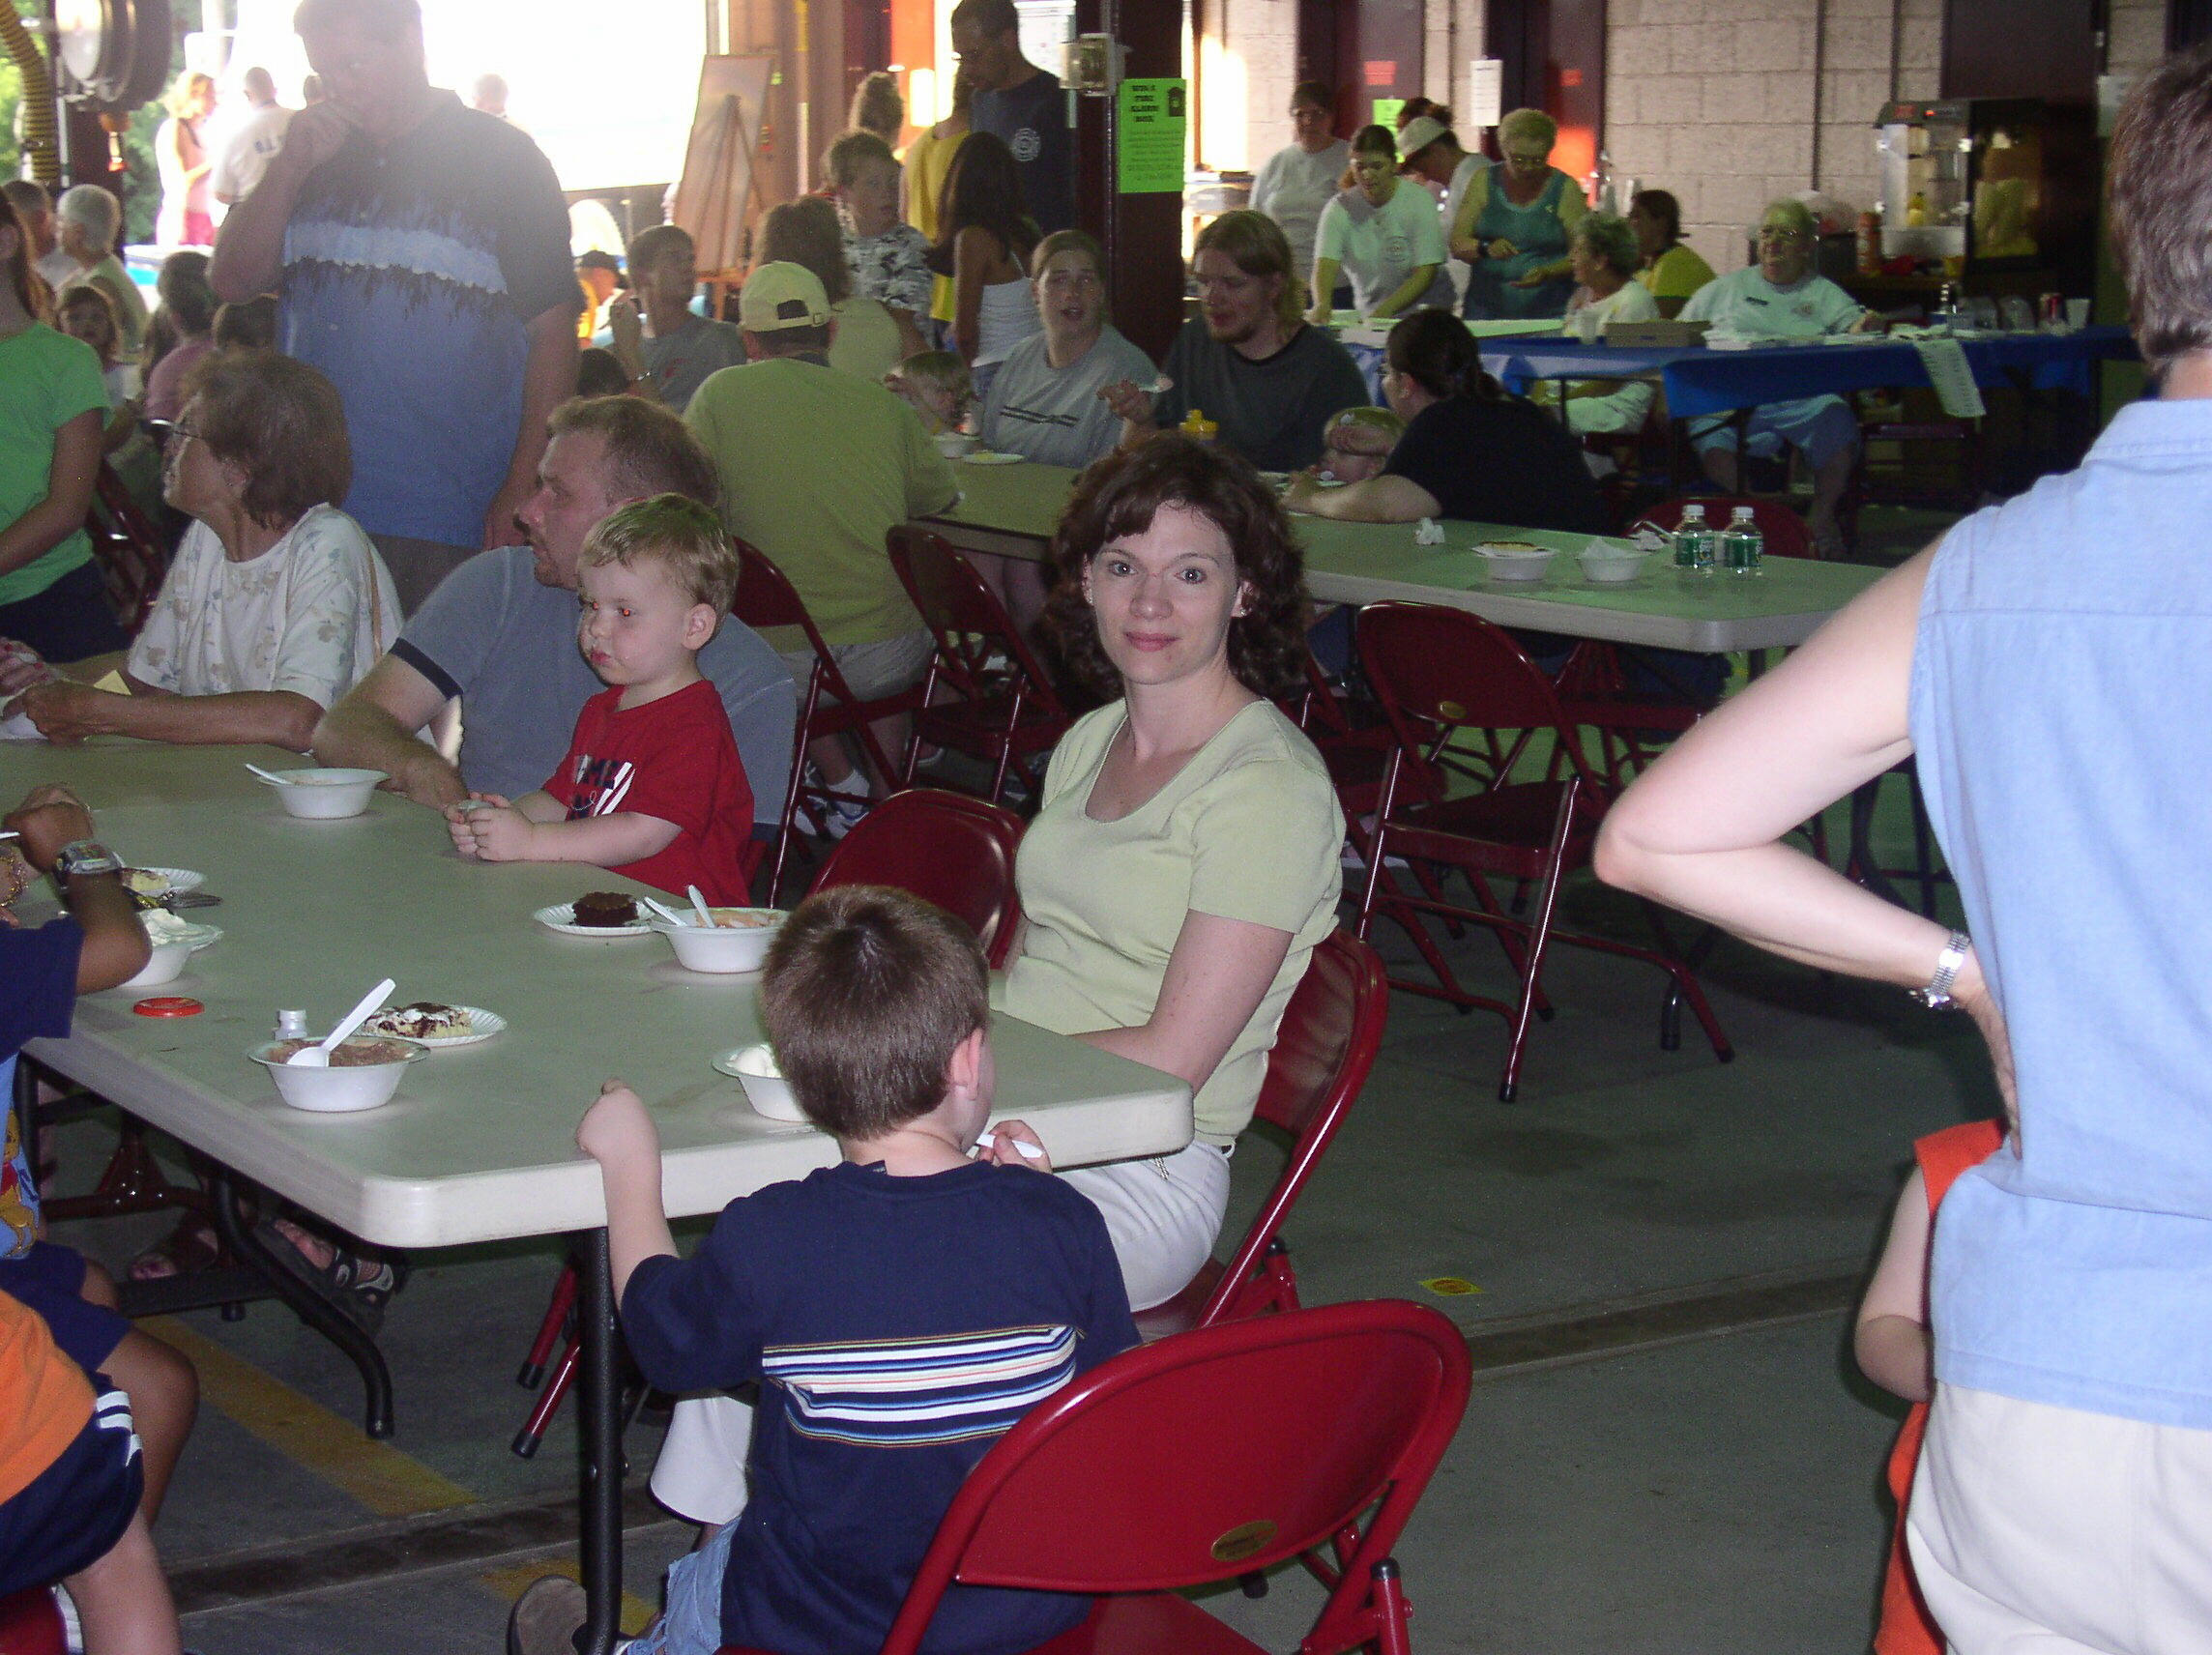 06-13-05  Other - Ice Cream Social